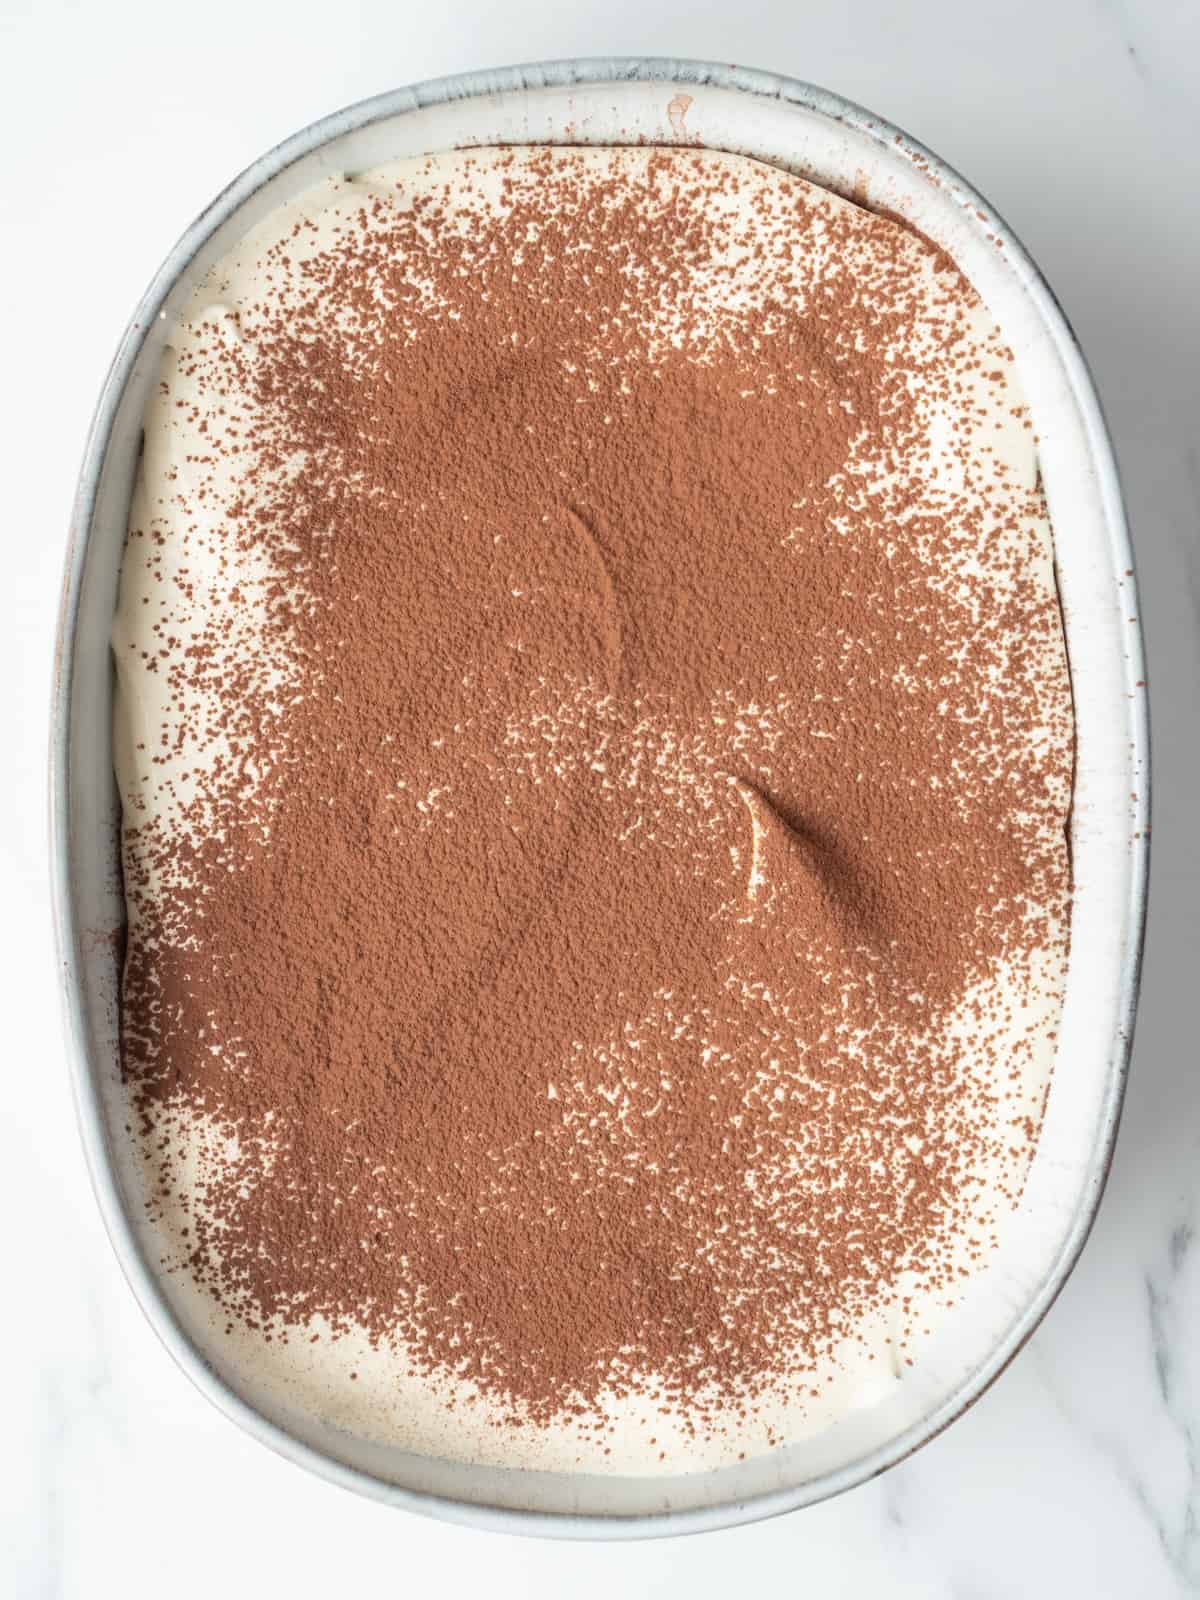 An oval platter with tiramisu being constructed in it, with one layer of ladyfingers topped with mascarpone-cream mixture dusted with cocoa powder.